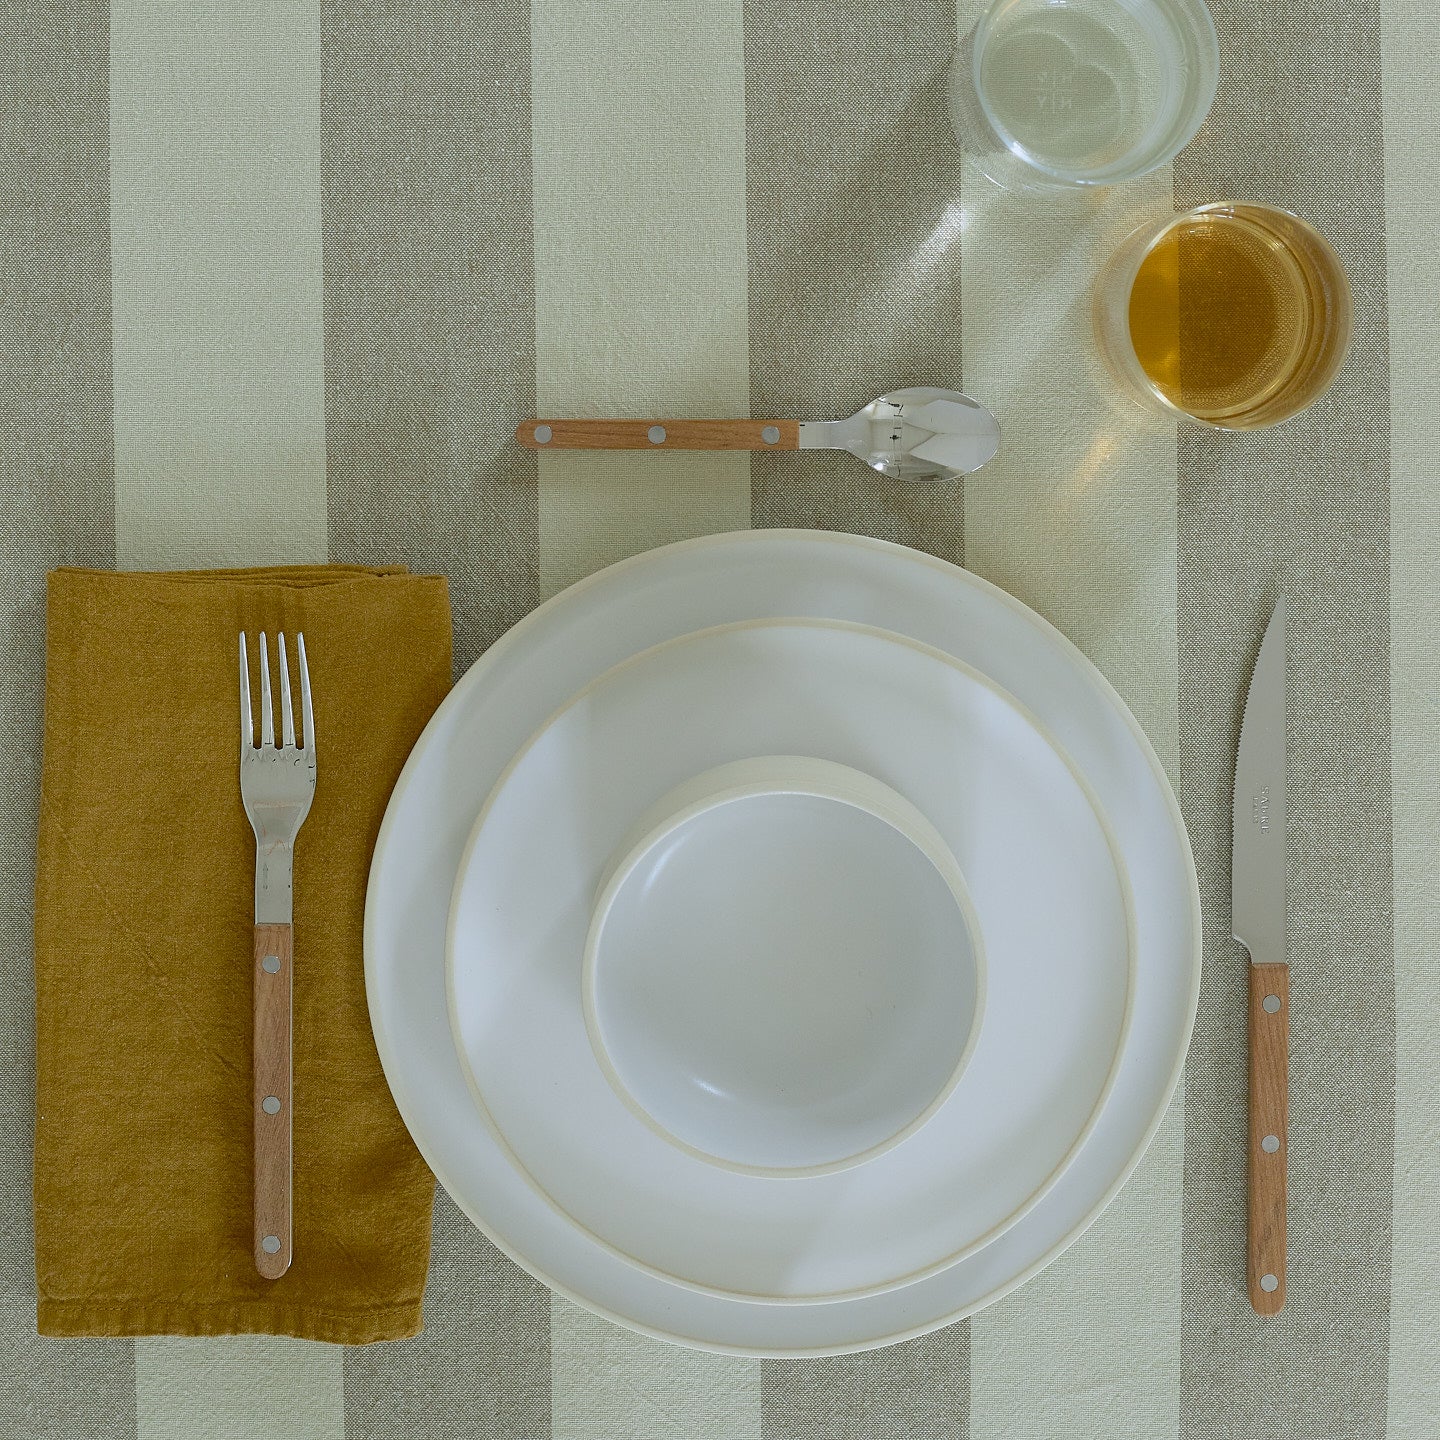 Placesetting with Simple Linen Napkin in Bronze.